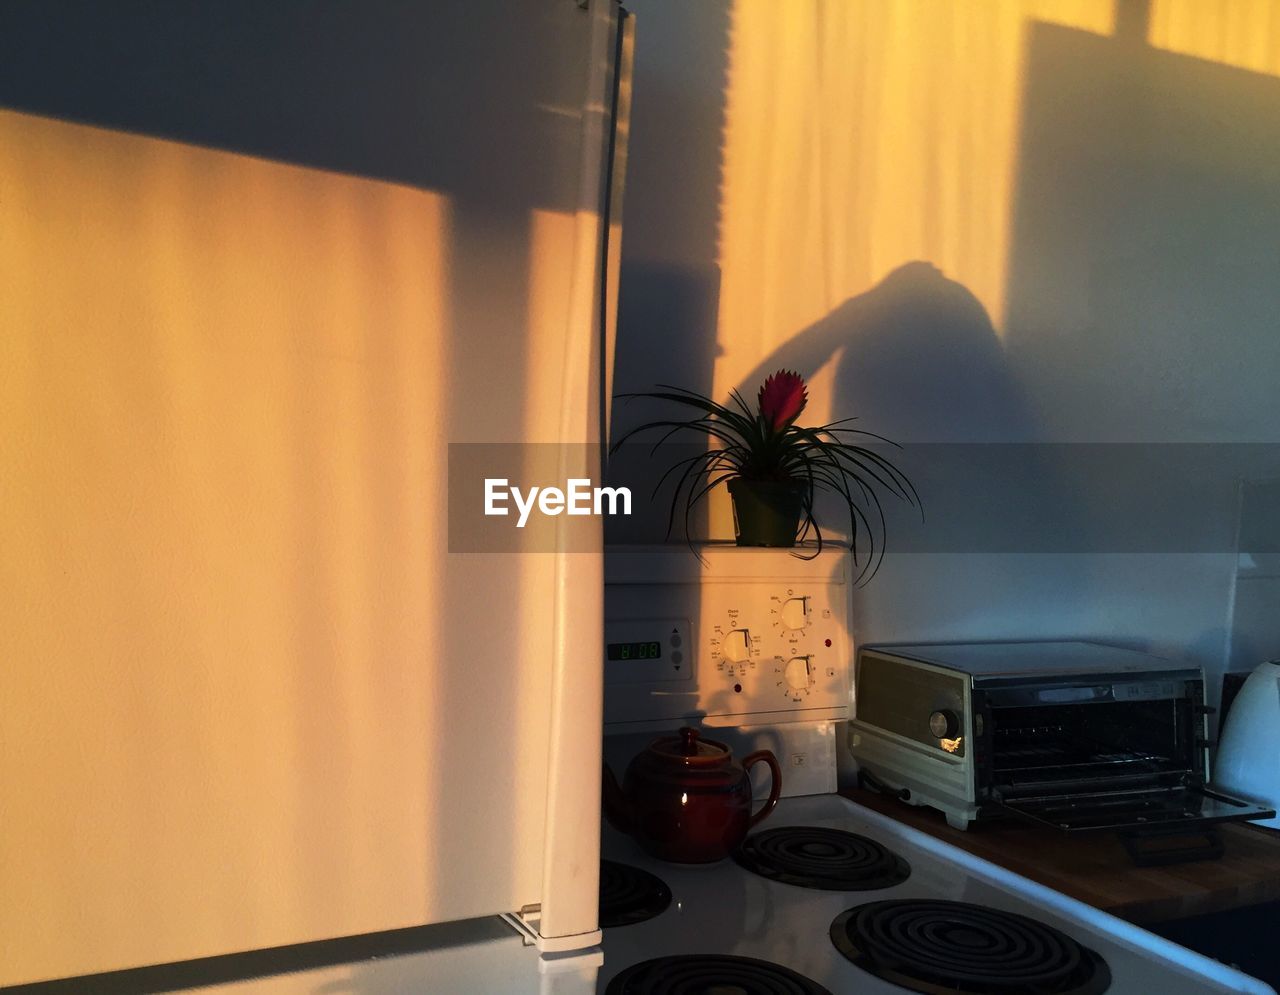 indoors, table, no people, vase, home interior, curtain, technology, nature, day, close-up